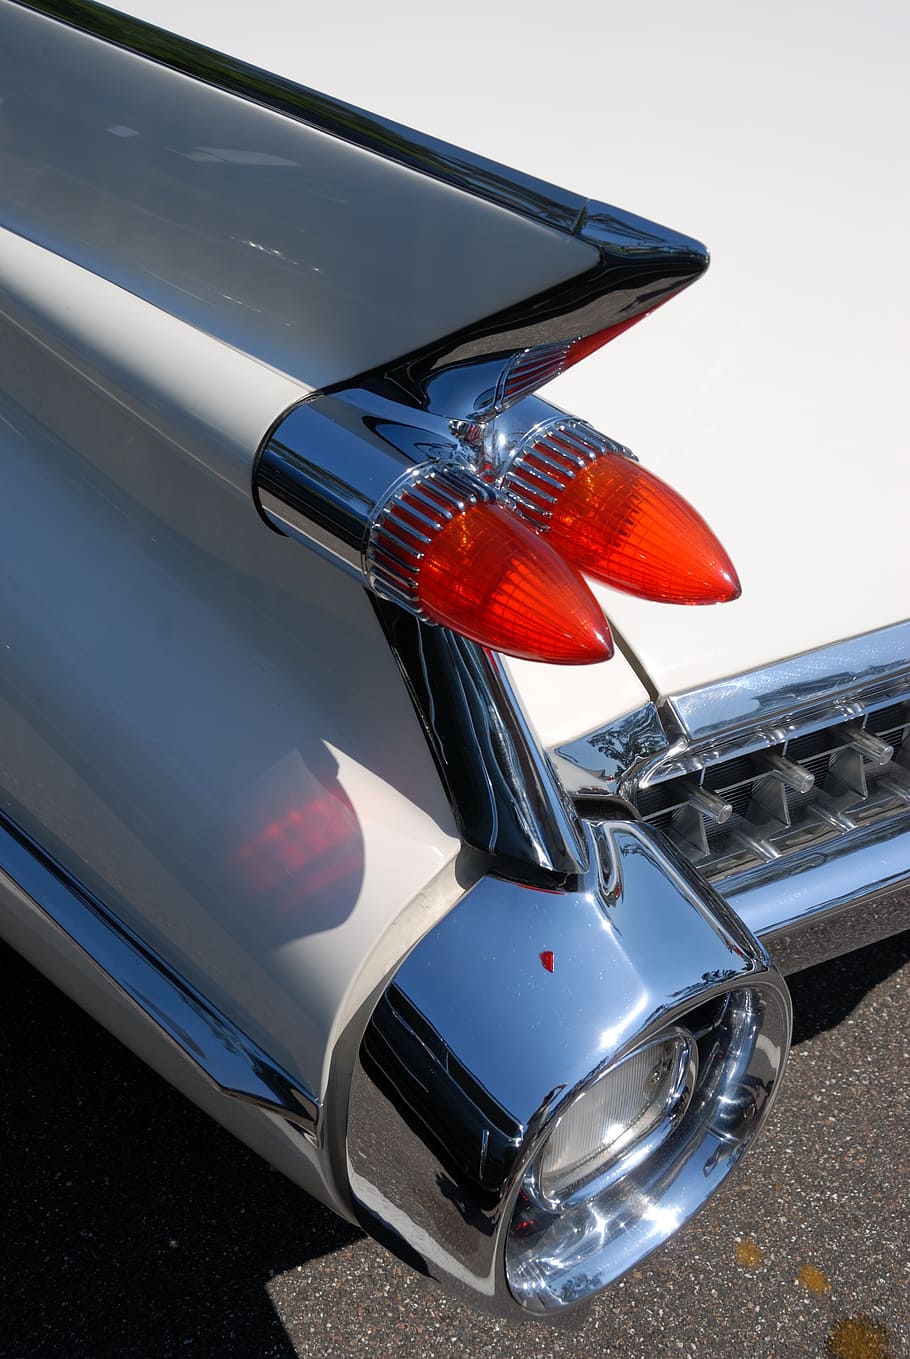 Hd Wallpaper Classic Cadillac Tail Light Rear Old Antique Auto Automobile Wallpaper Flare